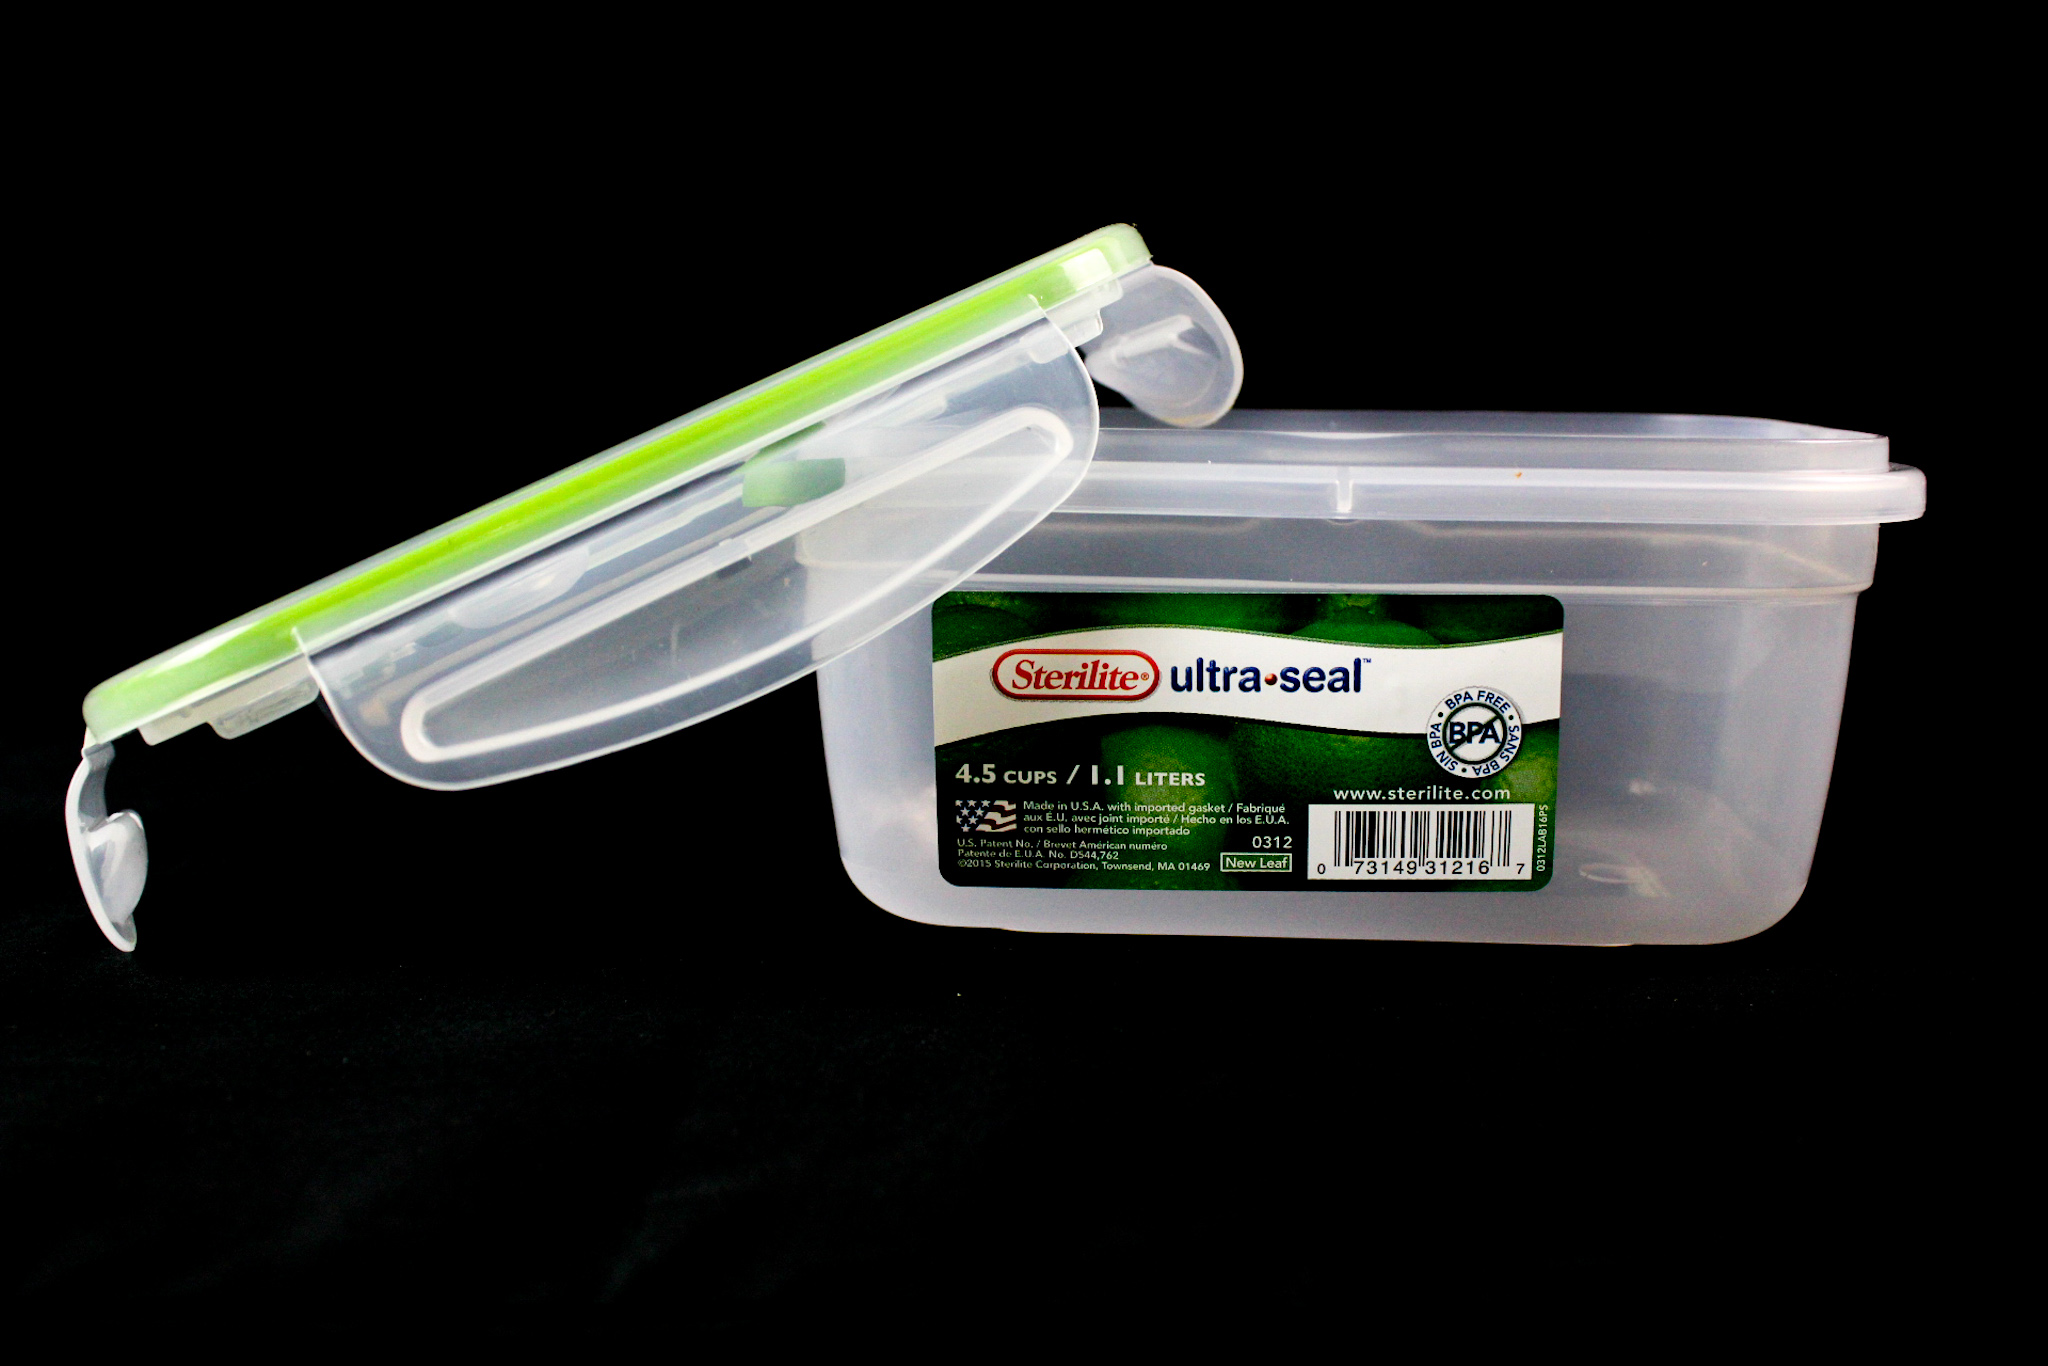 Sterilite - Clinton Sc 03121606 4.5 Cups Rectangle Ultra-Seal Container - image 5 of 6